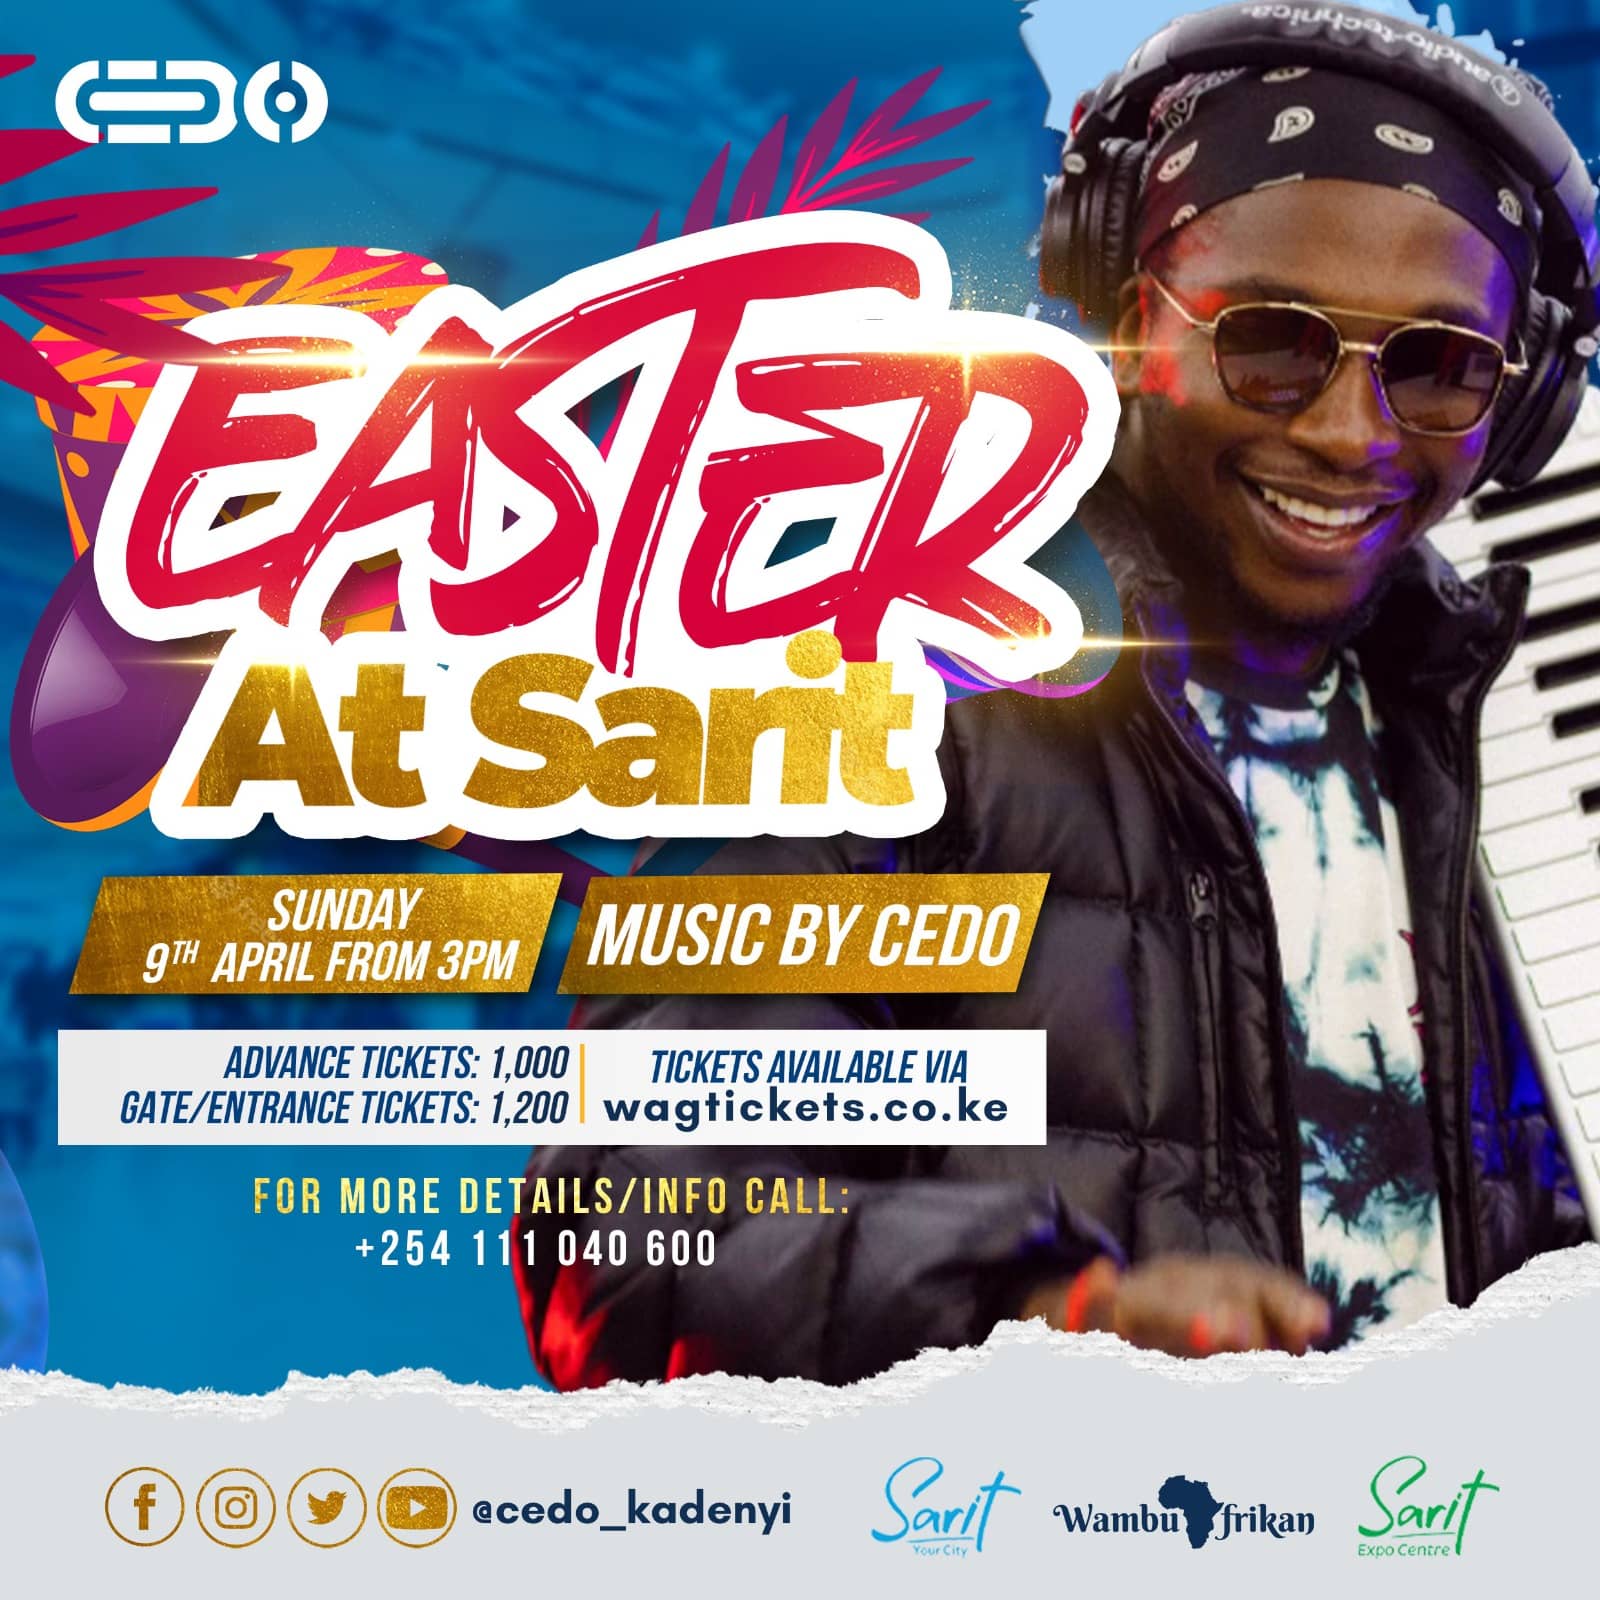 Easter at Sarit with Cedo